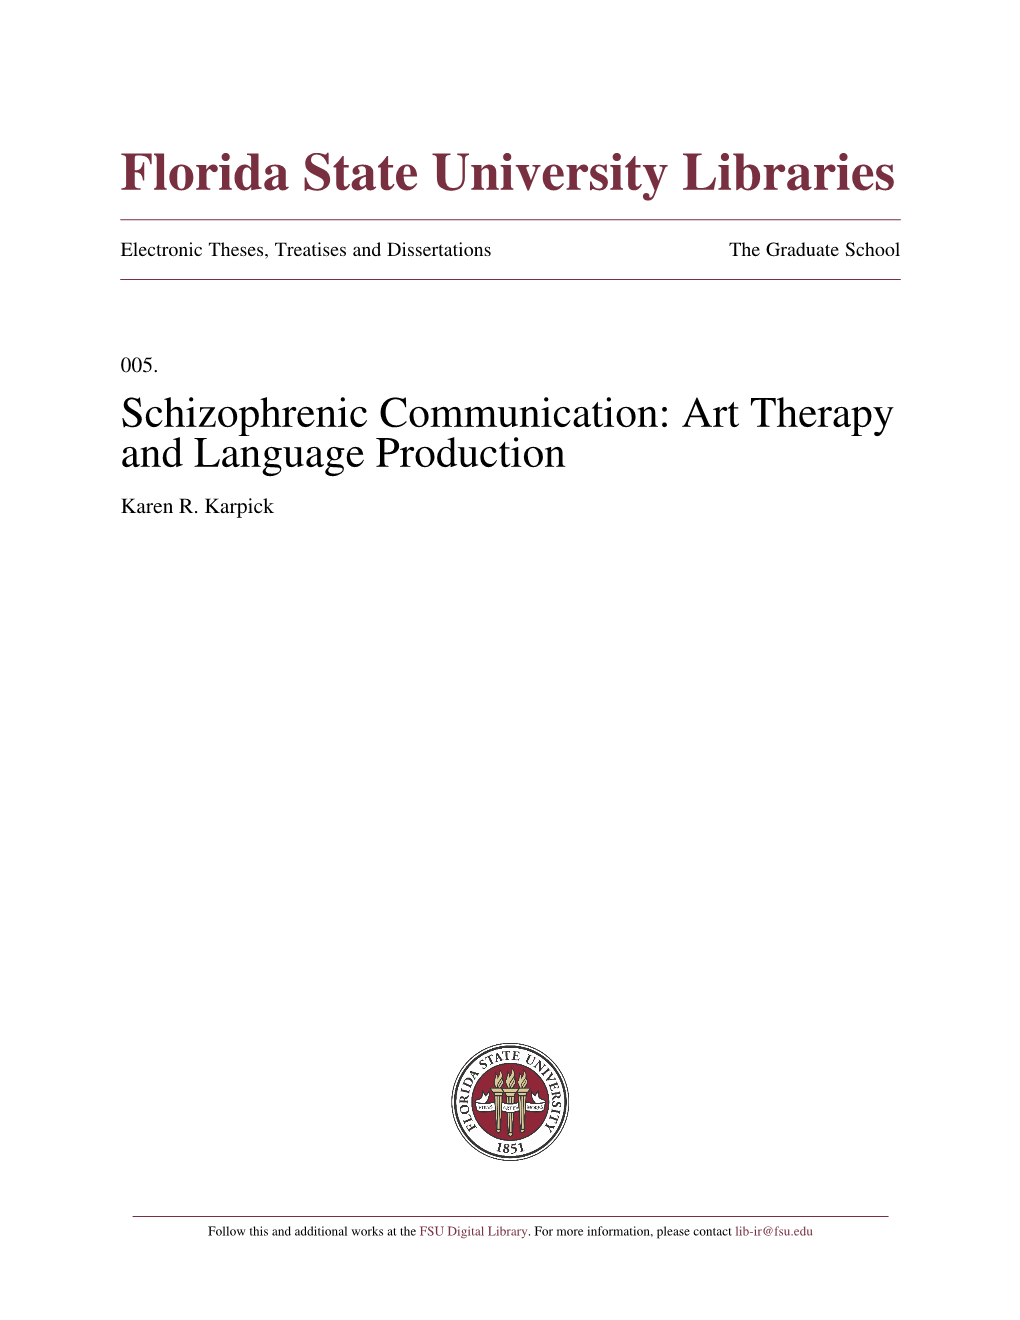 Schizophrenic Communication: Art Therapy and Language Production Karen R